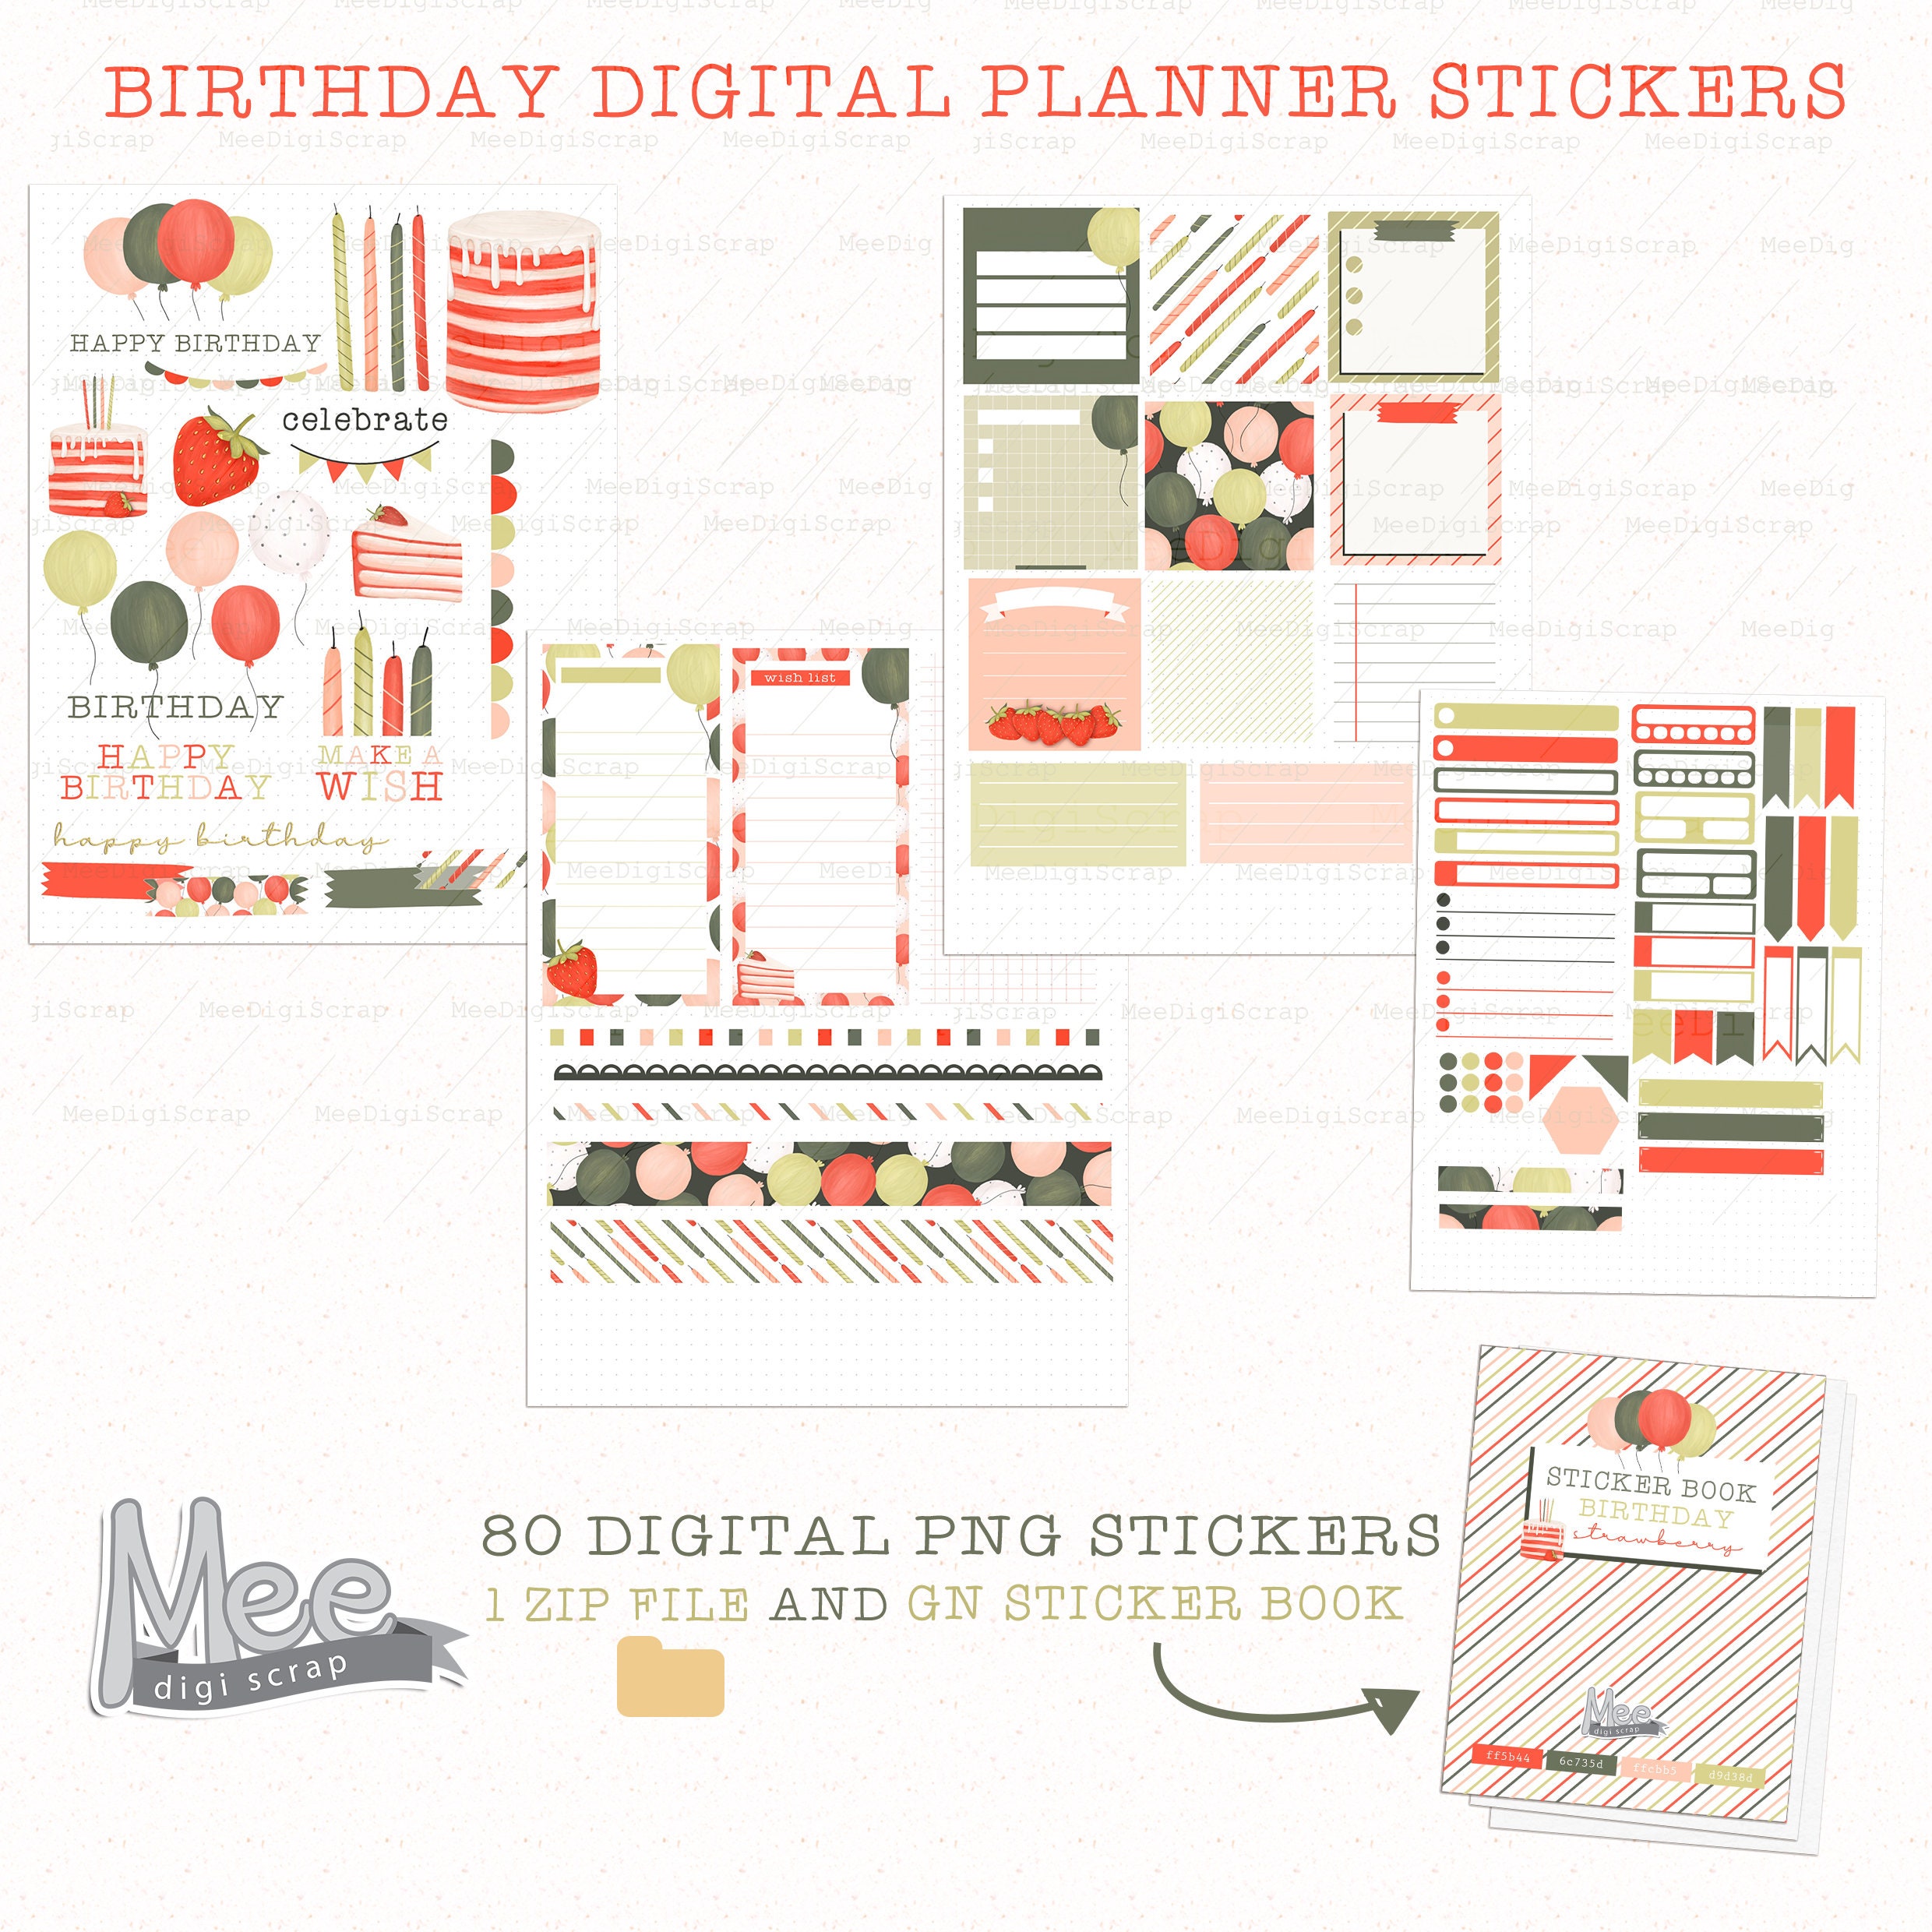 Strawberry Date Dots - Planner Stickers – Paper Kay